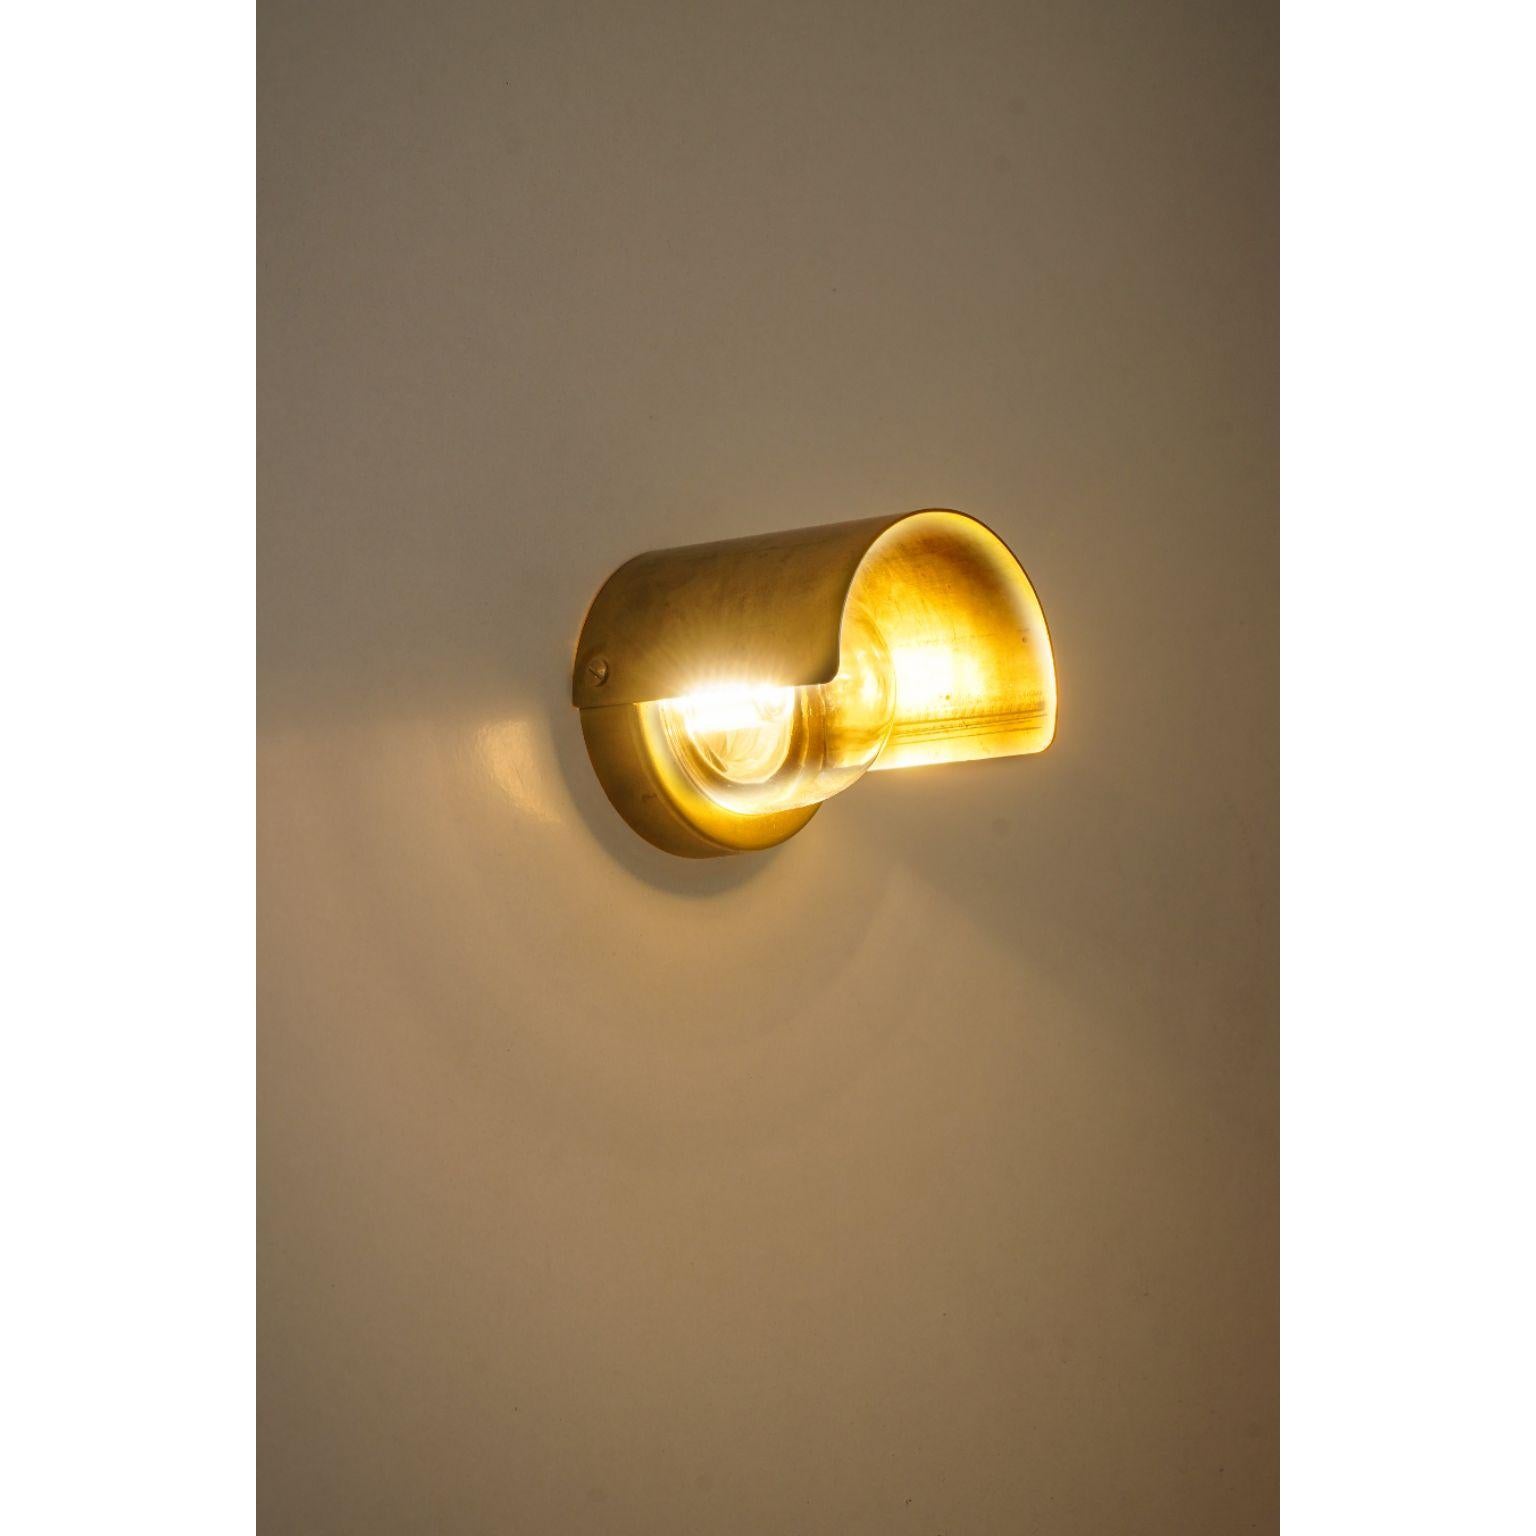 Alba Monocle Exterior Wall Light by Contain
Dimensions: D 8 x W 8 x H 10 cm. 
Materials: Brass, 3D printed PLA structure and optical lens.

Available in different finishes, Universal box required for installation / indoor and outdoor. Please contact